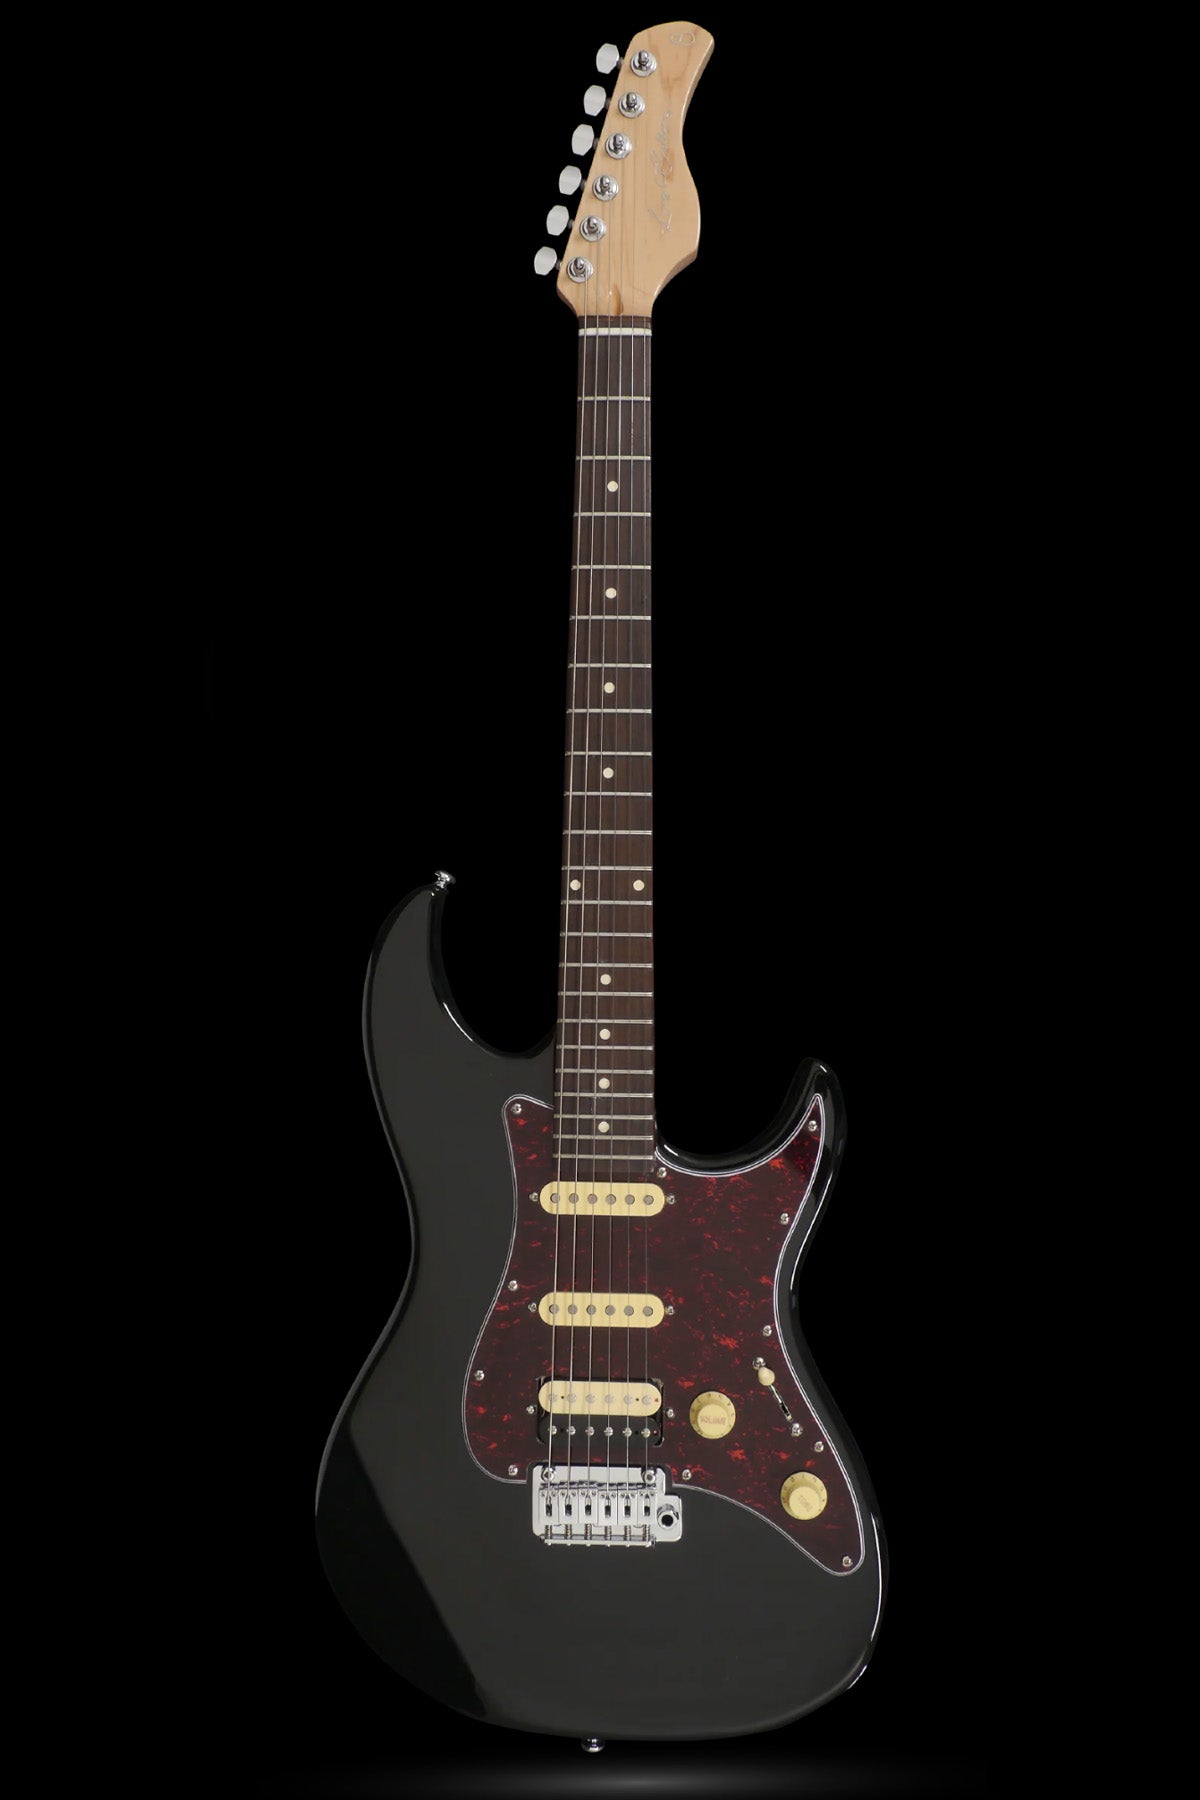 Sire S3 Electric Guitar